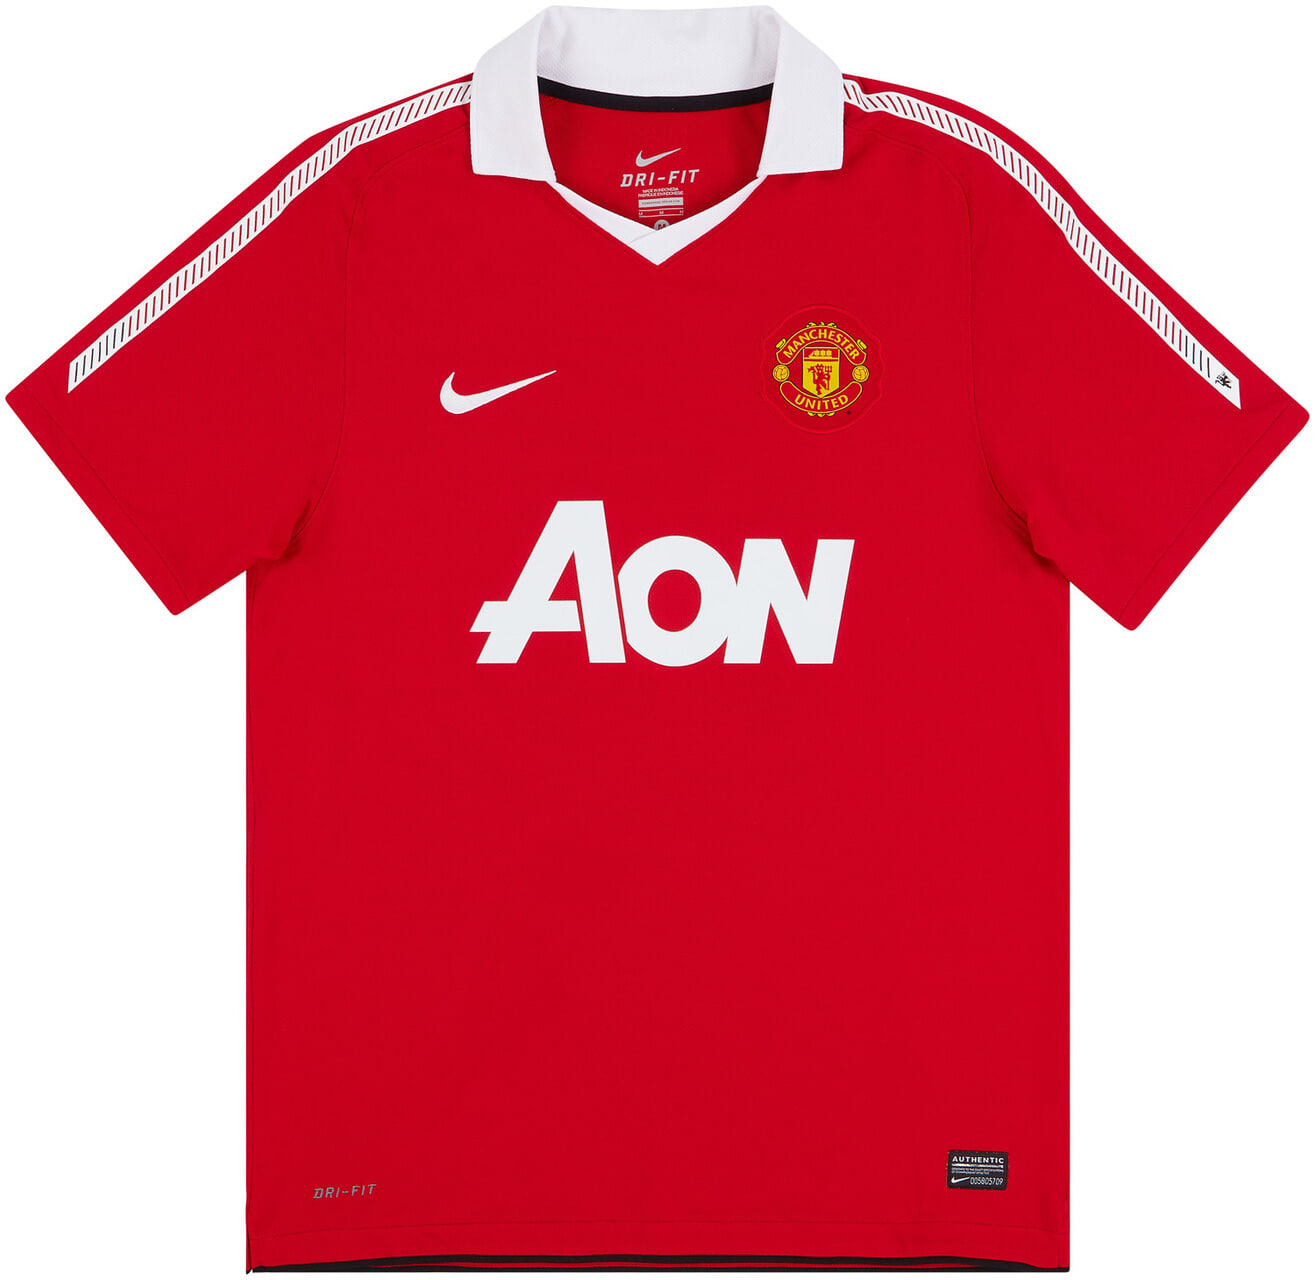 2010-11 Manchester United Home Shirt - 6/10 -